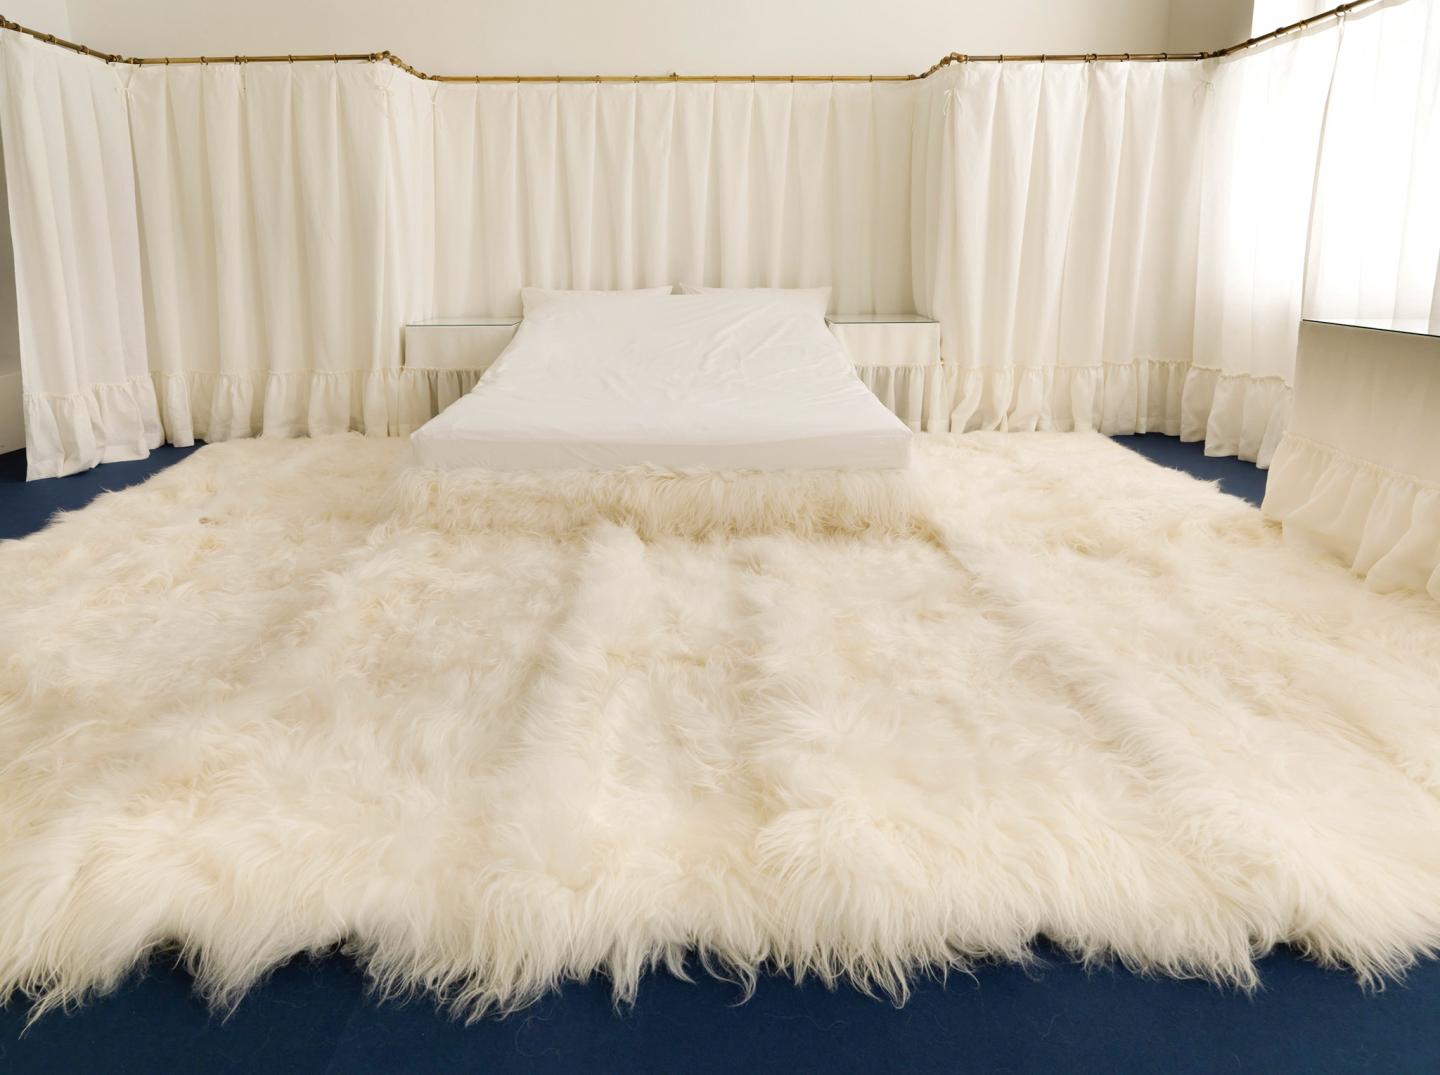 A room with cream colored drapes on the walls and a furry rug and a white bed on blue carpet.